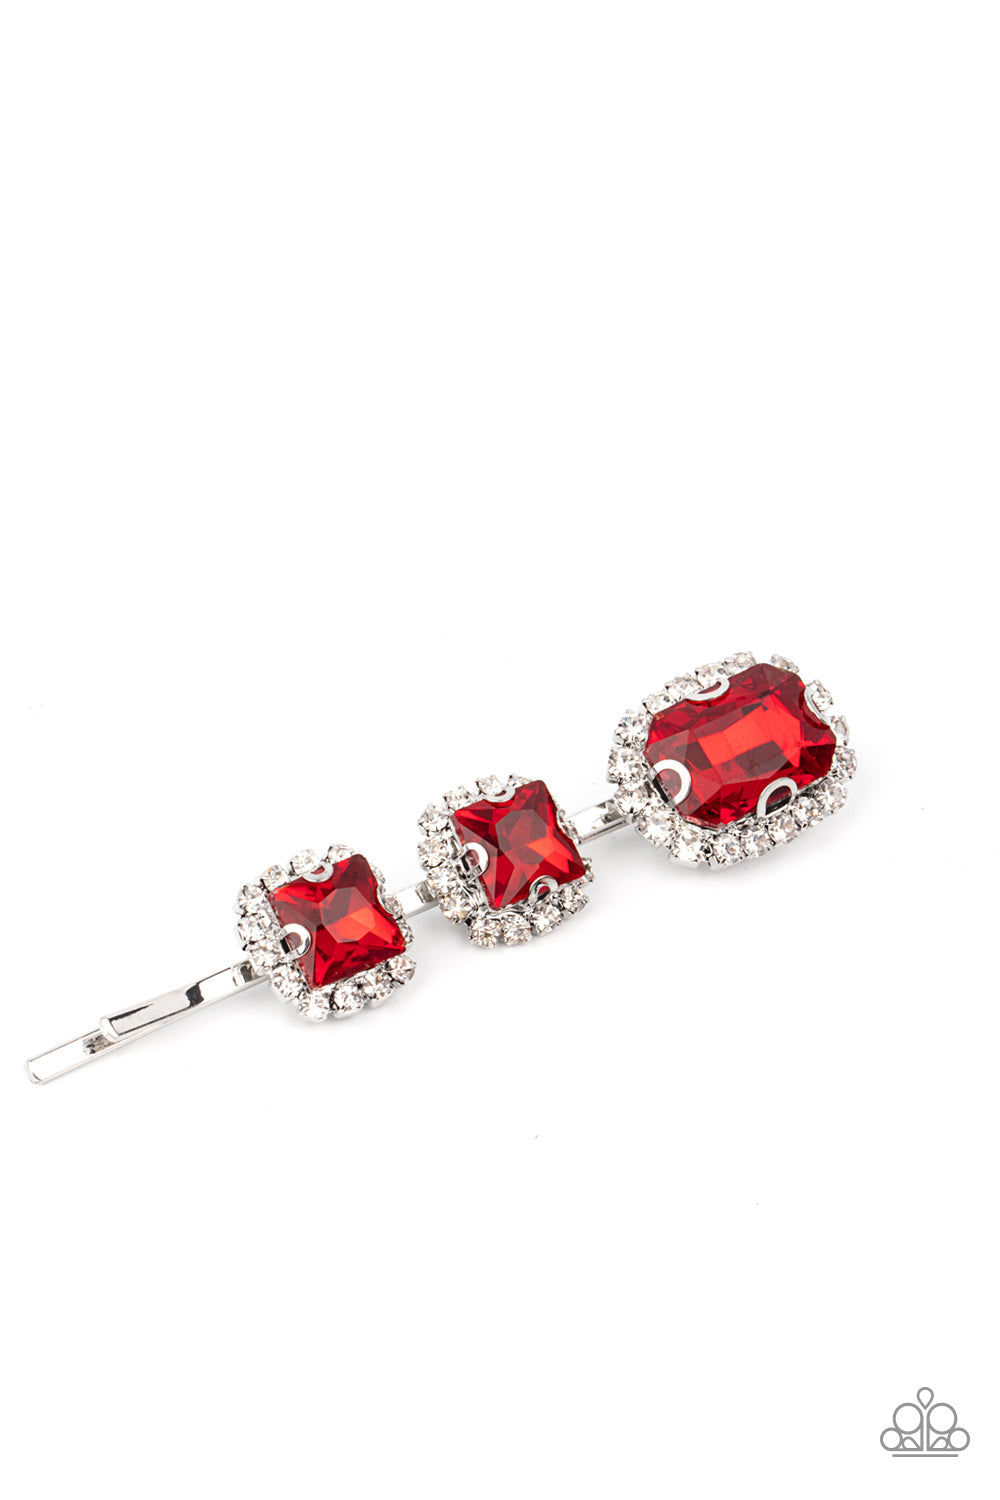 Teasable Twinkle Paparazzi Hair Clip - Red